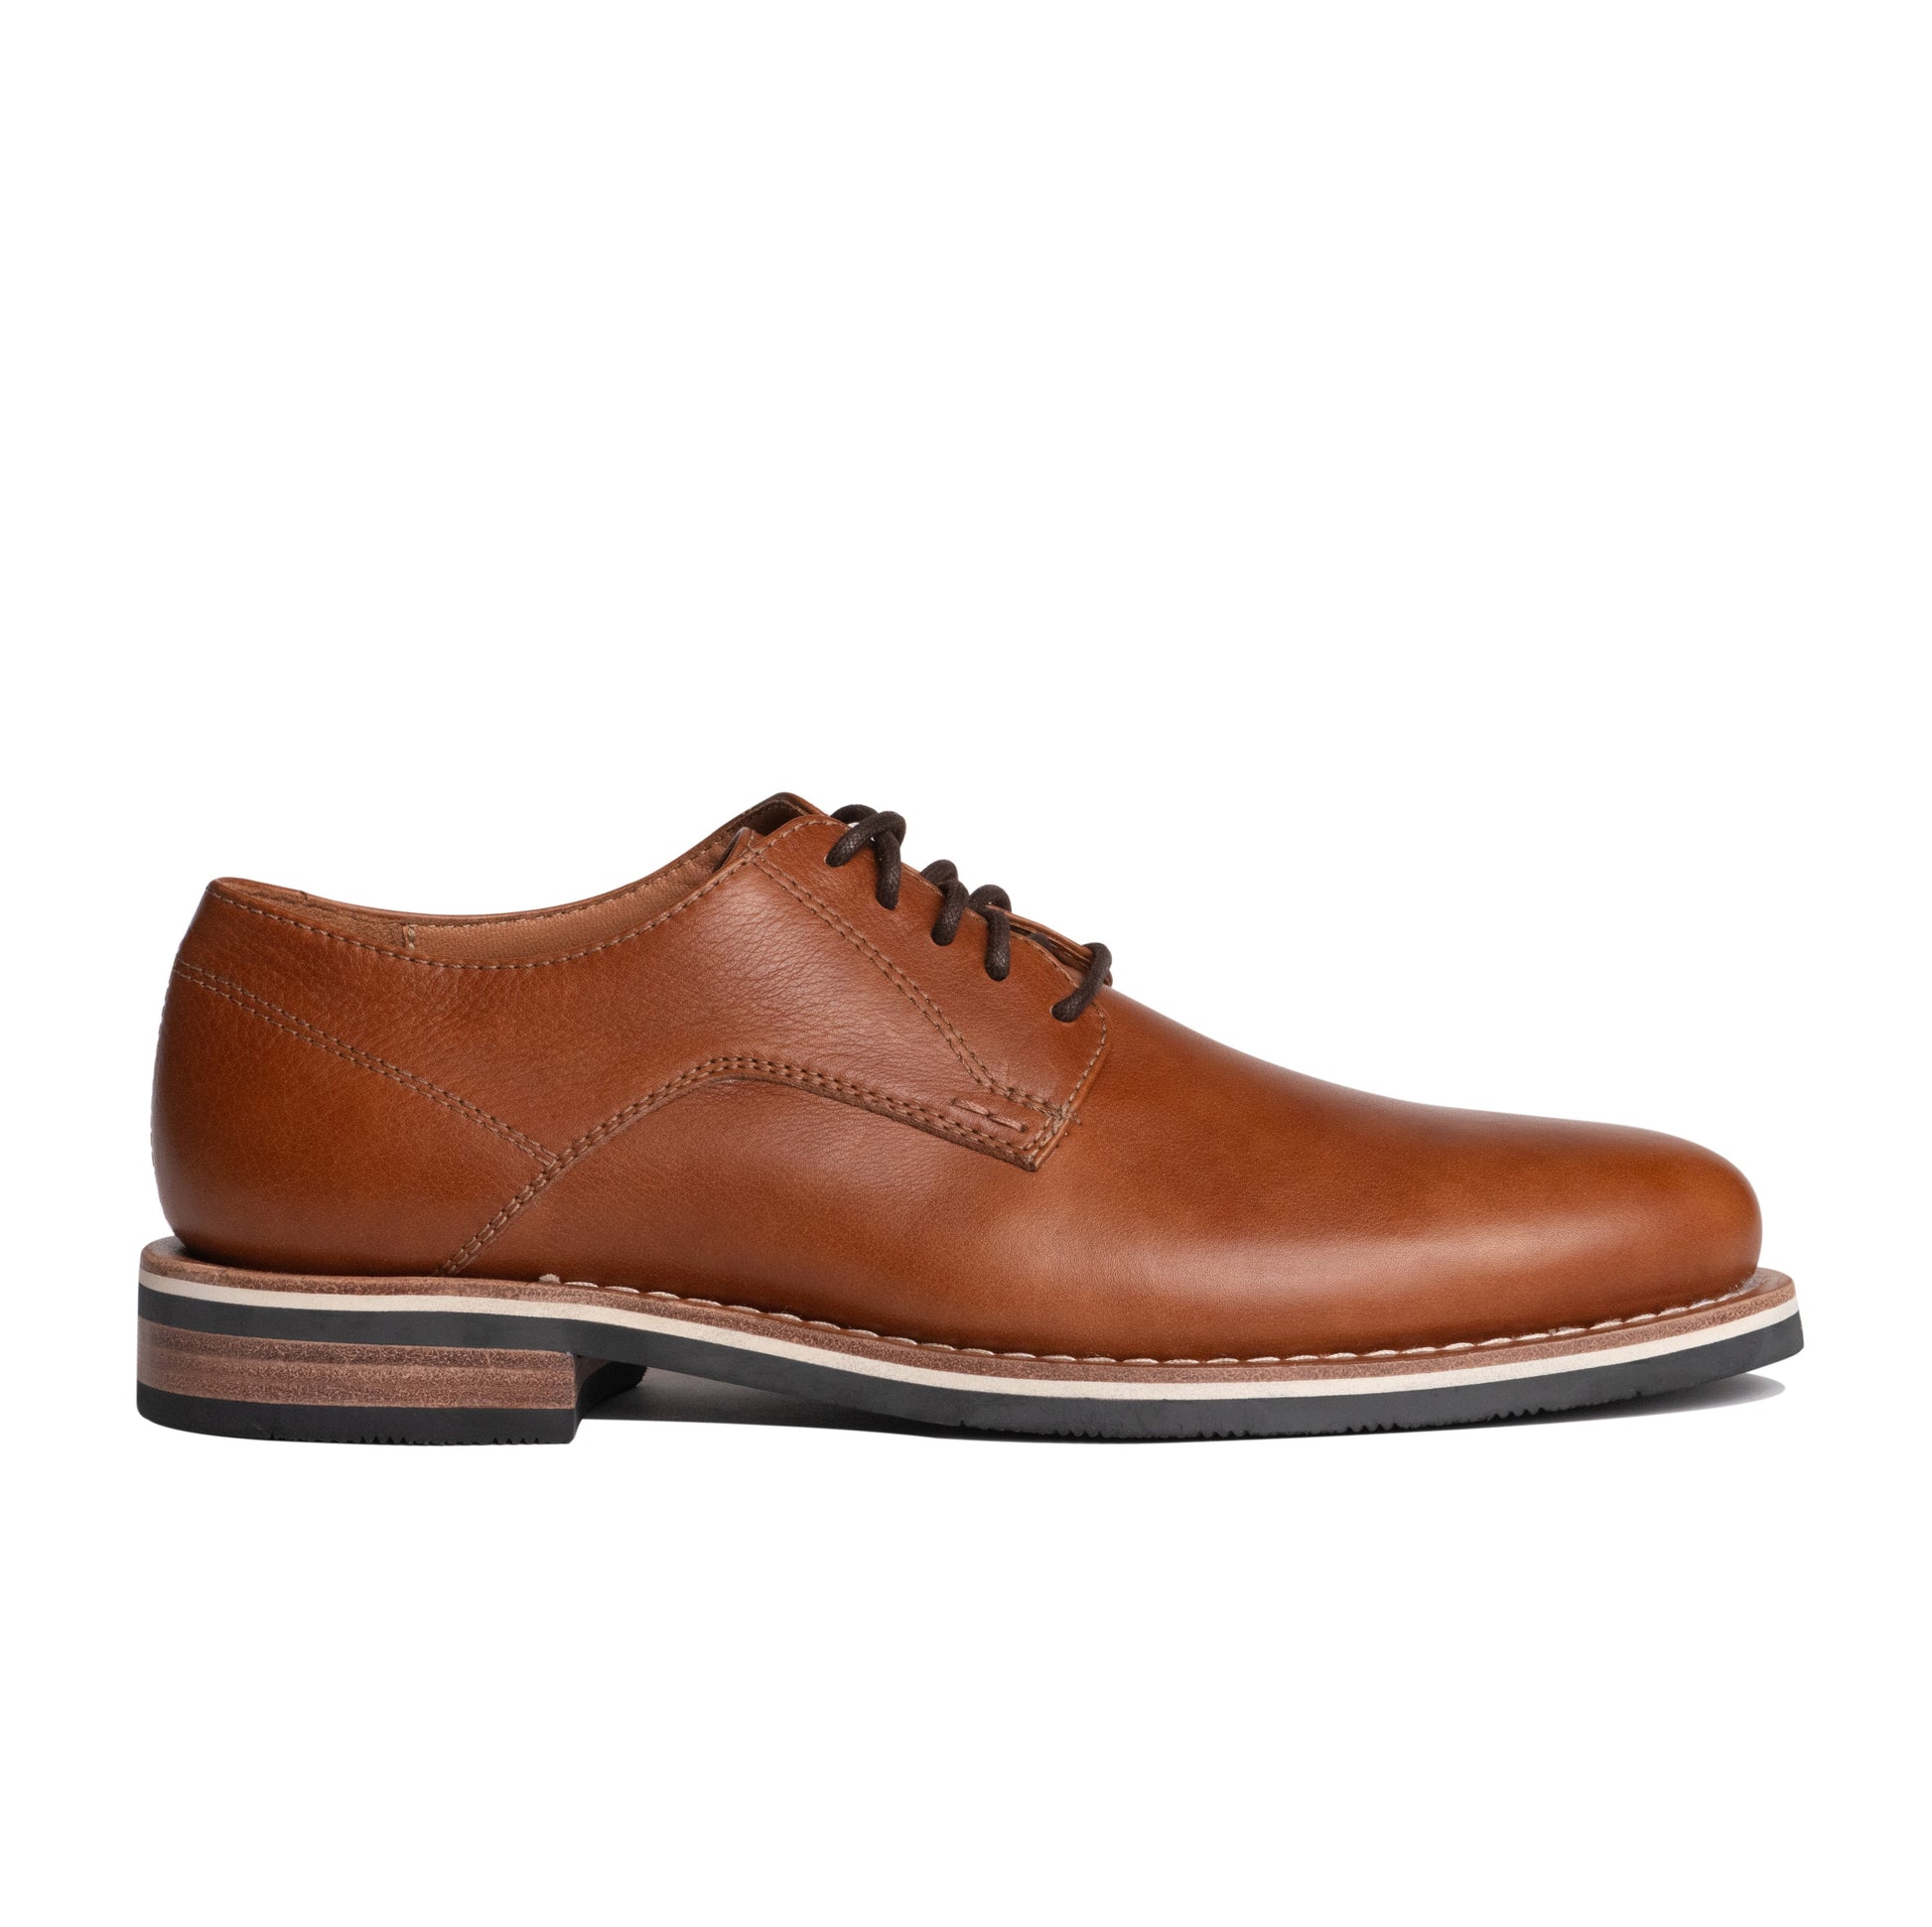 HELM Shoes The Evans Whiskey